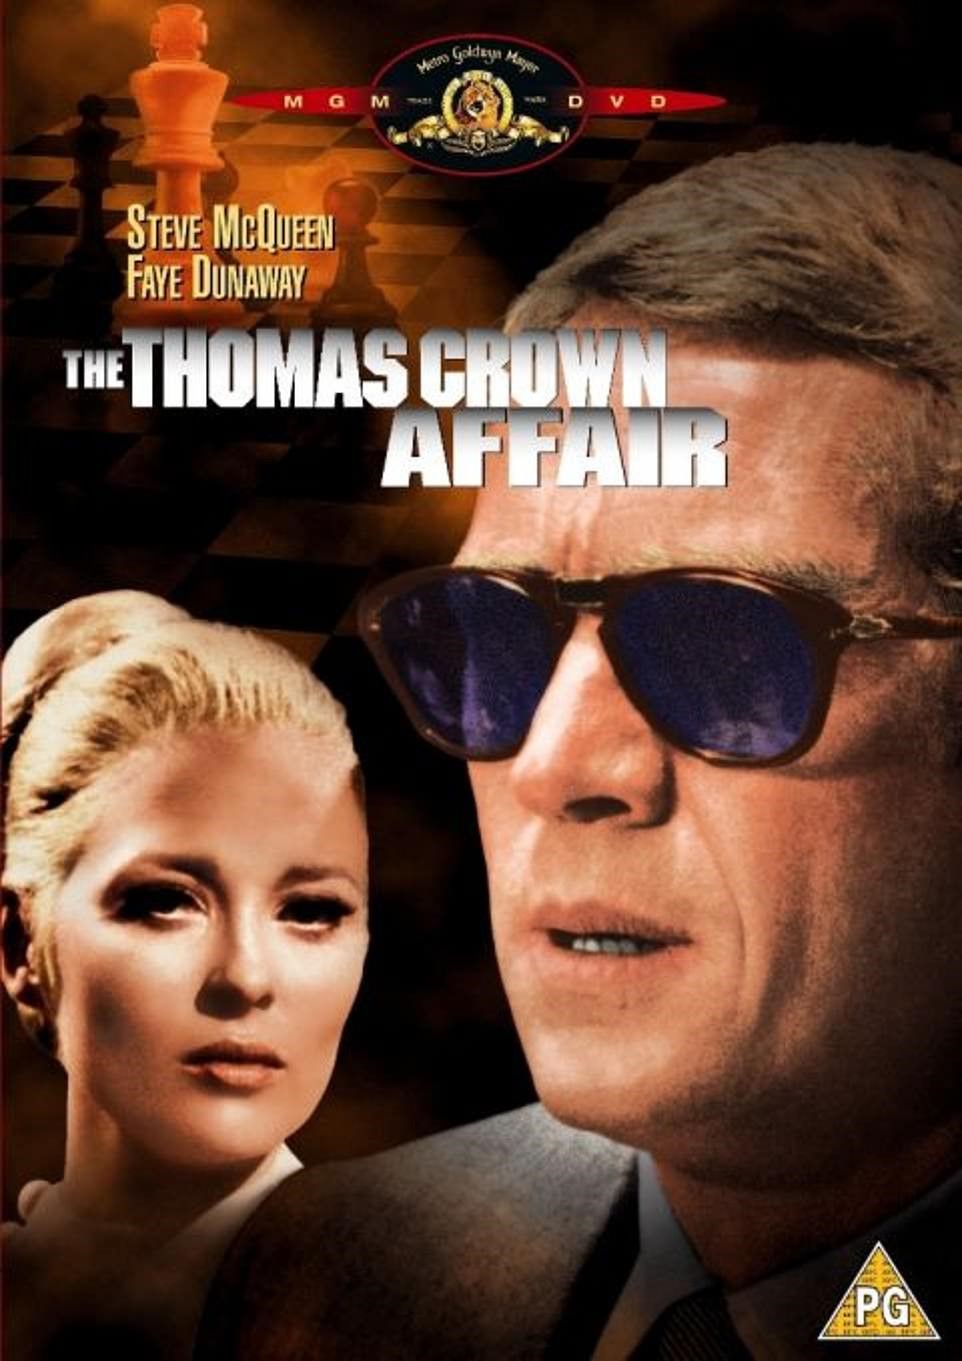 A poster of the movie 'The Thomas Crown affair'.